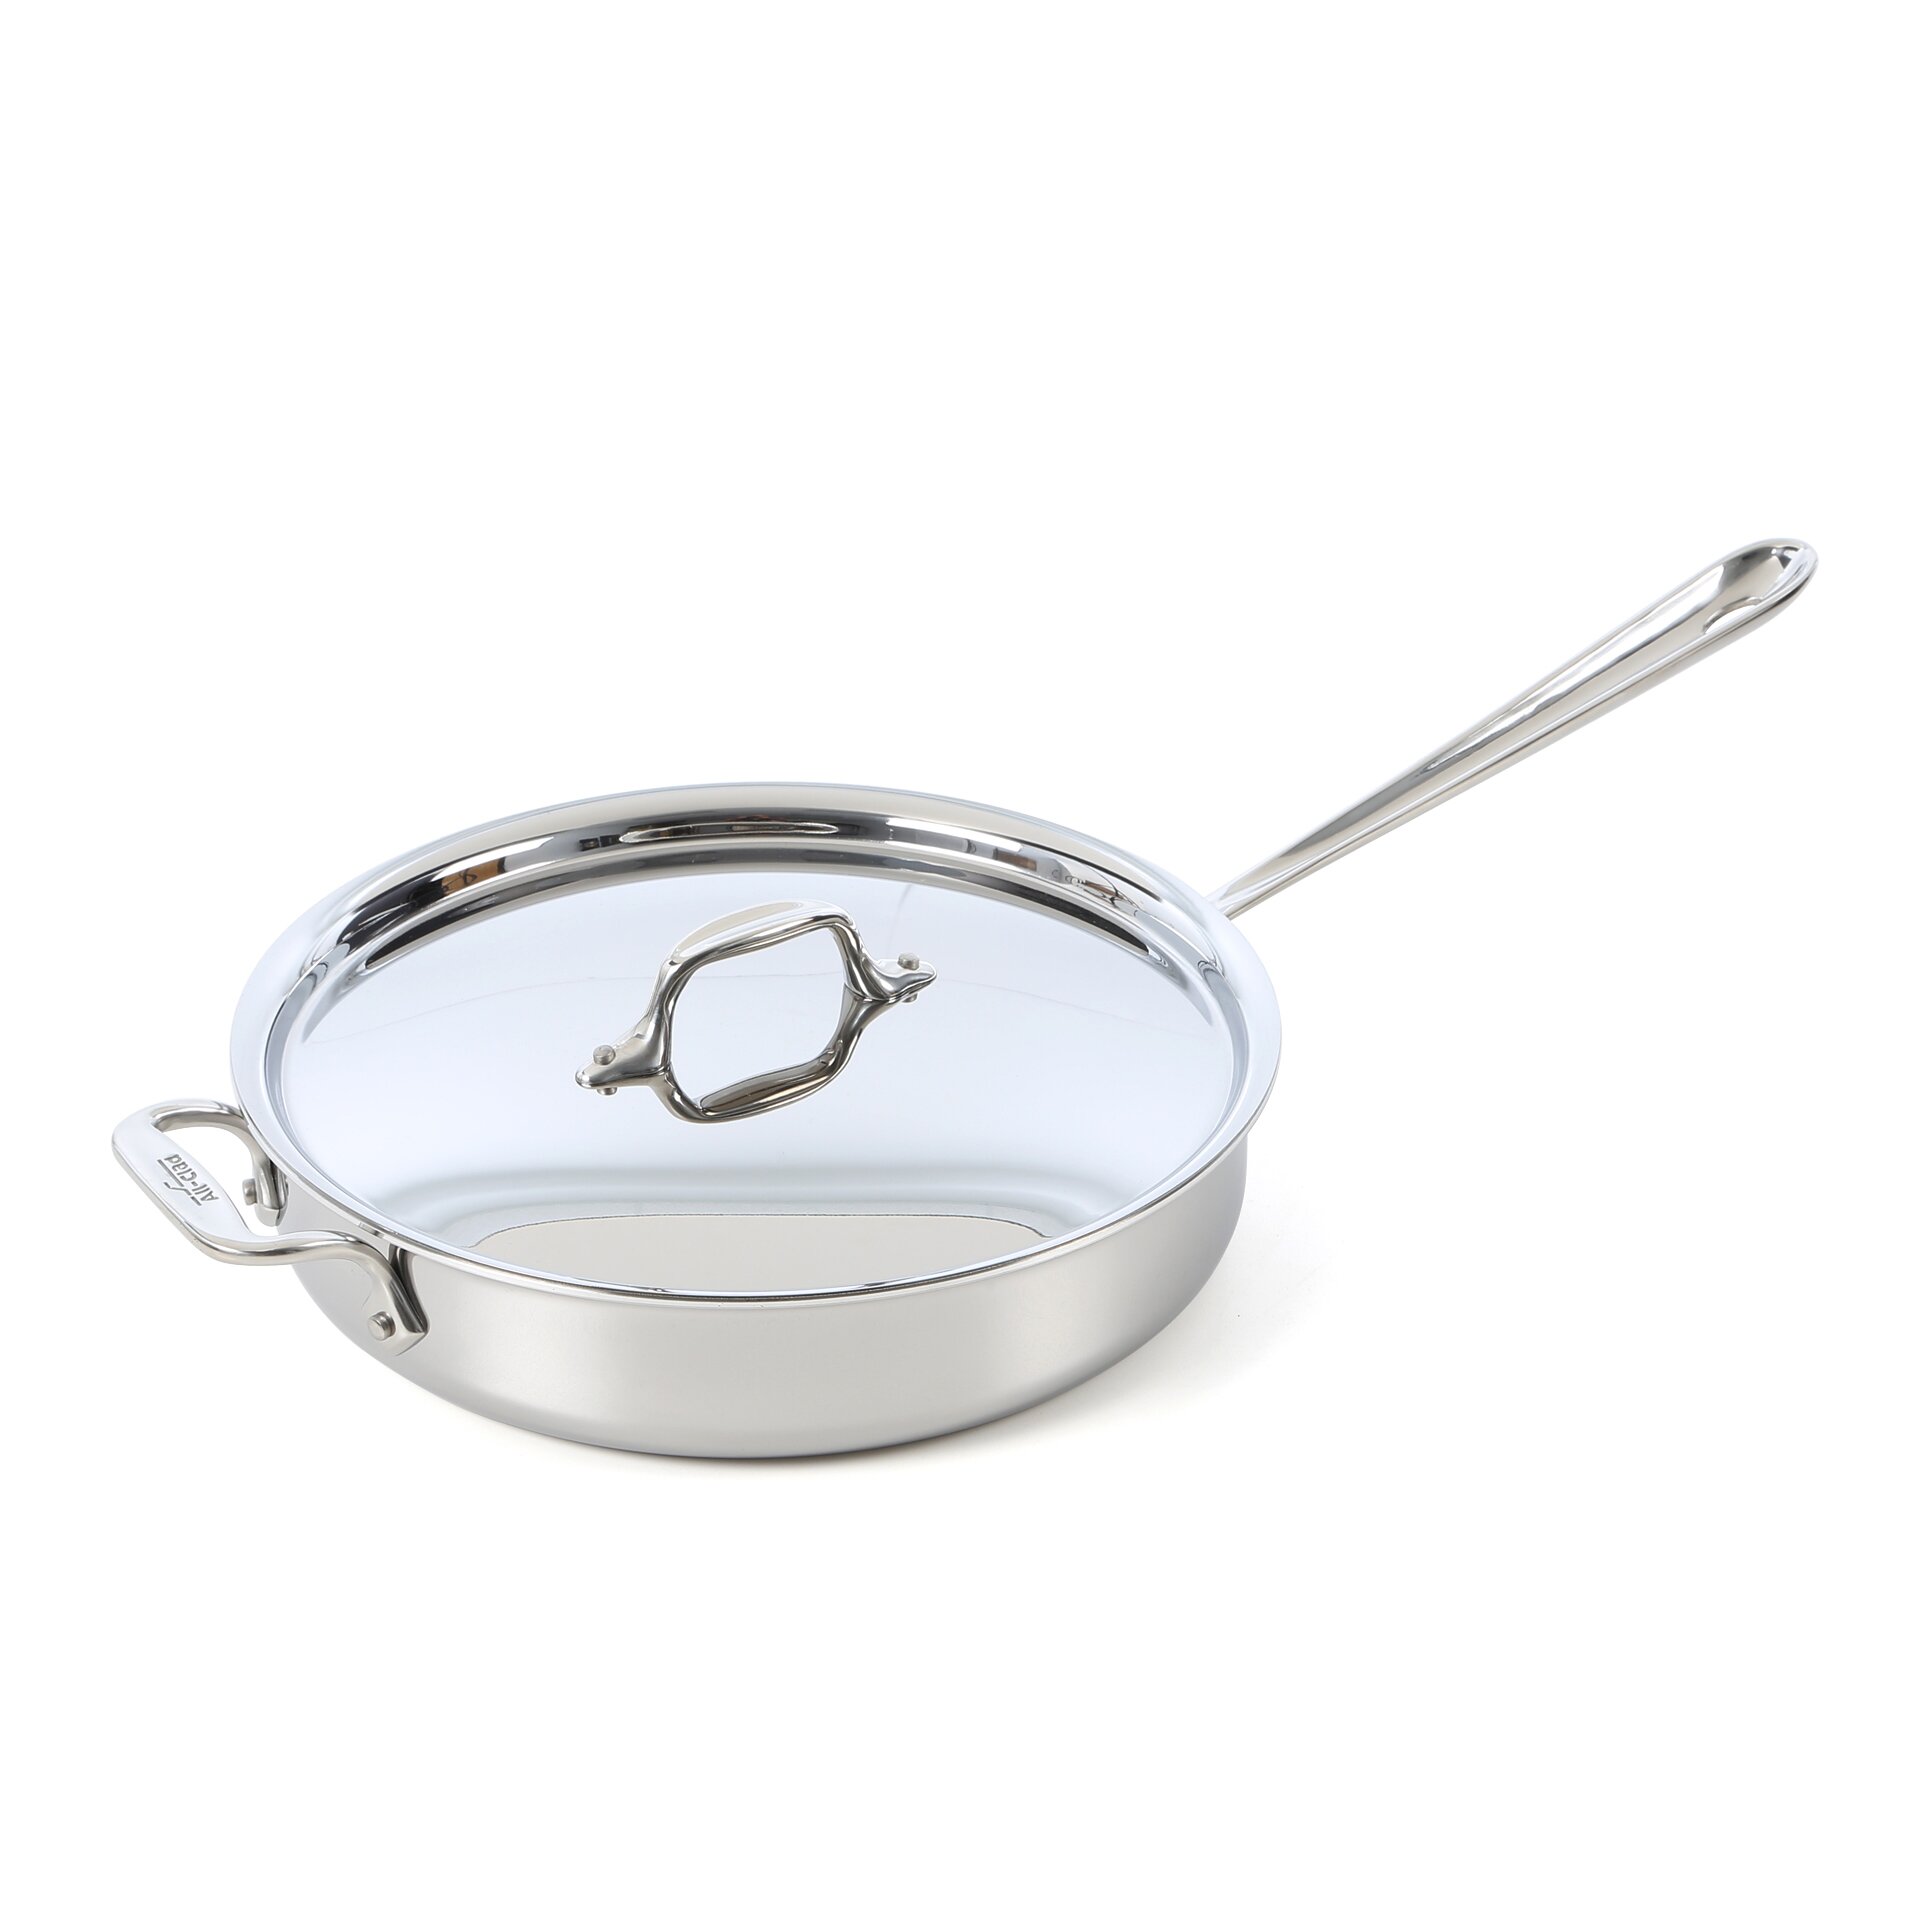 All-Clad 3qt. Stainless Steel Sauté Pan with Lid & Reviews | Wayfair